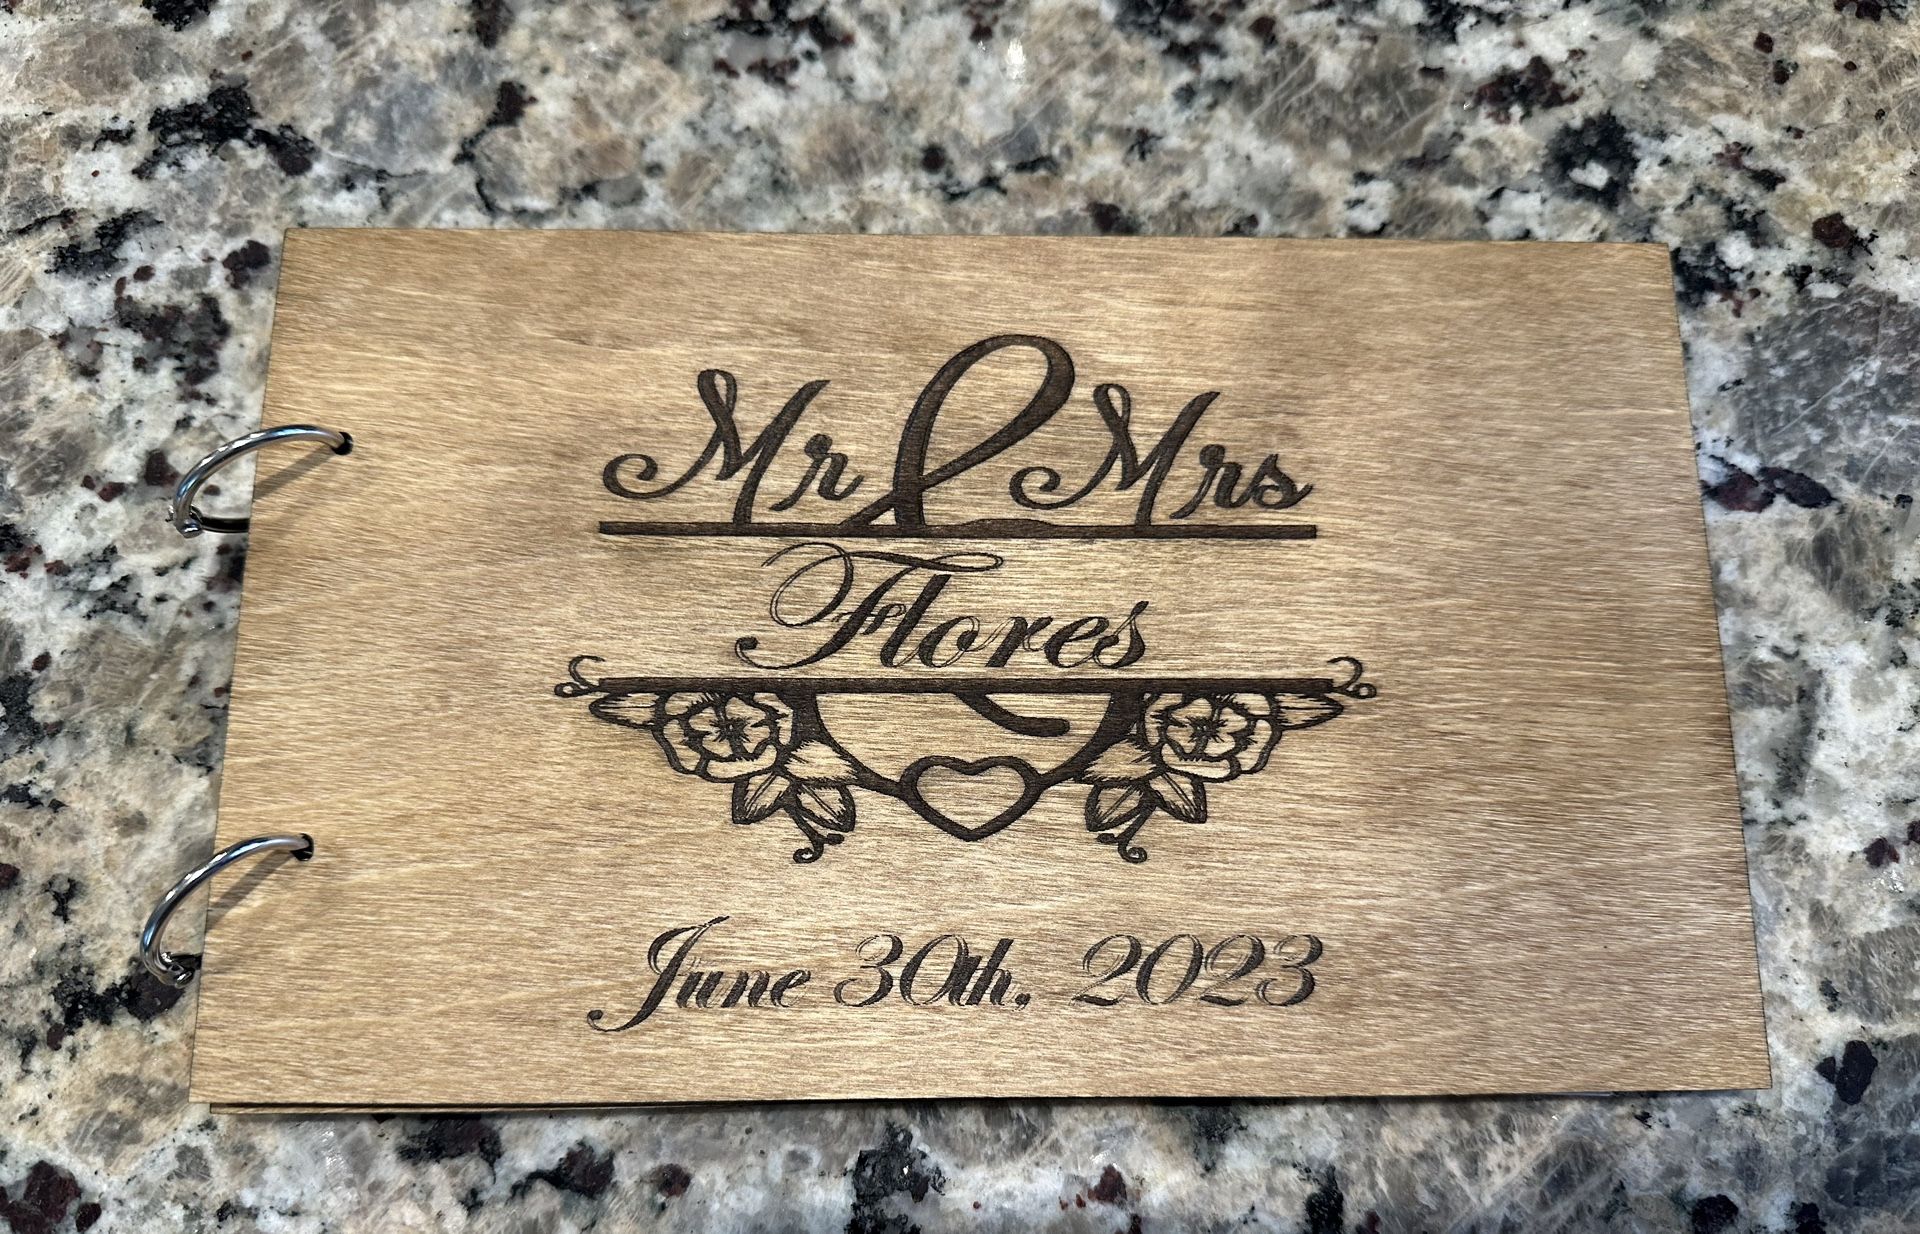 Wedding Gift, Rustic Wedding, Personalized guest book Valentine Decor, Photo Guestbook, Fall Winter Spring Summer Mr and Mrs guestbook